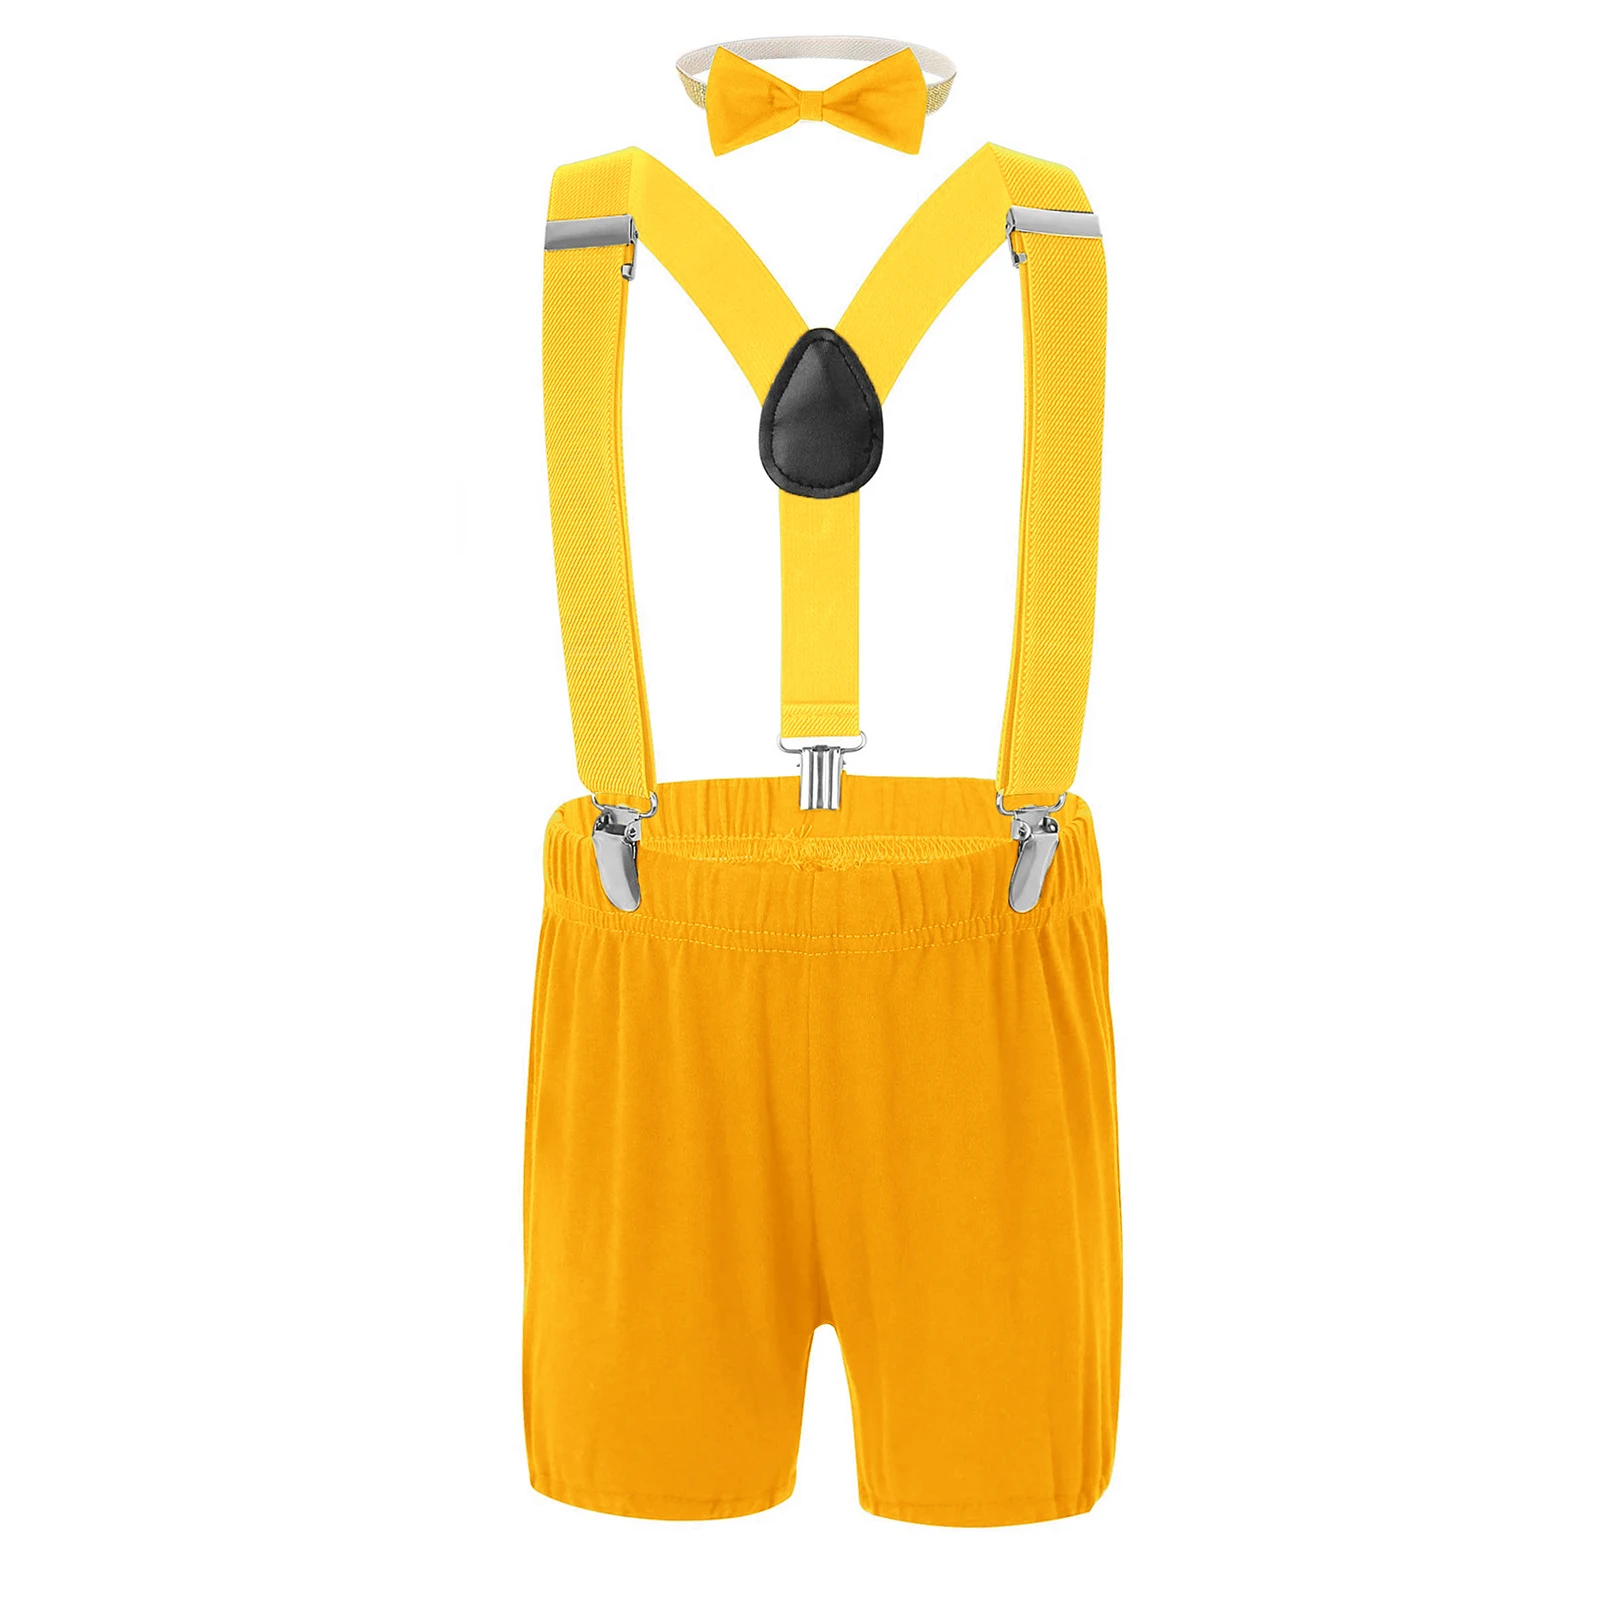 Baby Boys Girls Party Outfit Suspender Shorts Detachable Y-back Elastic Straps Shorts And Bow Headband